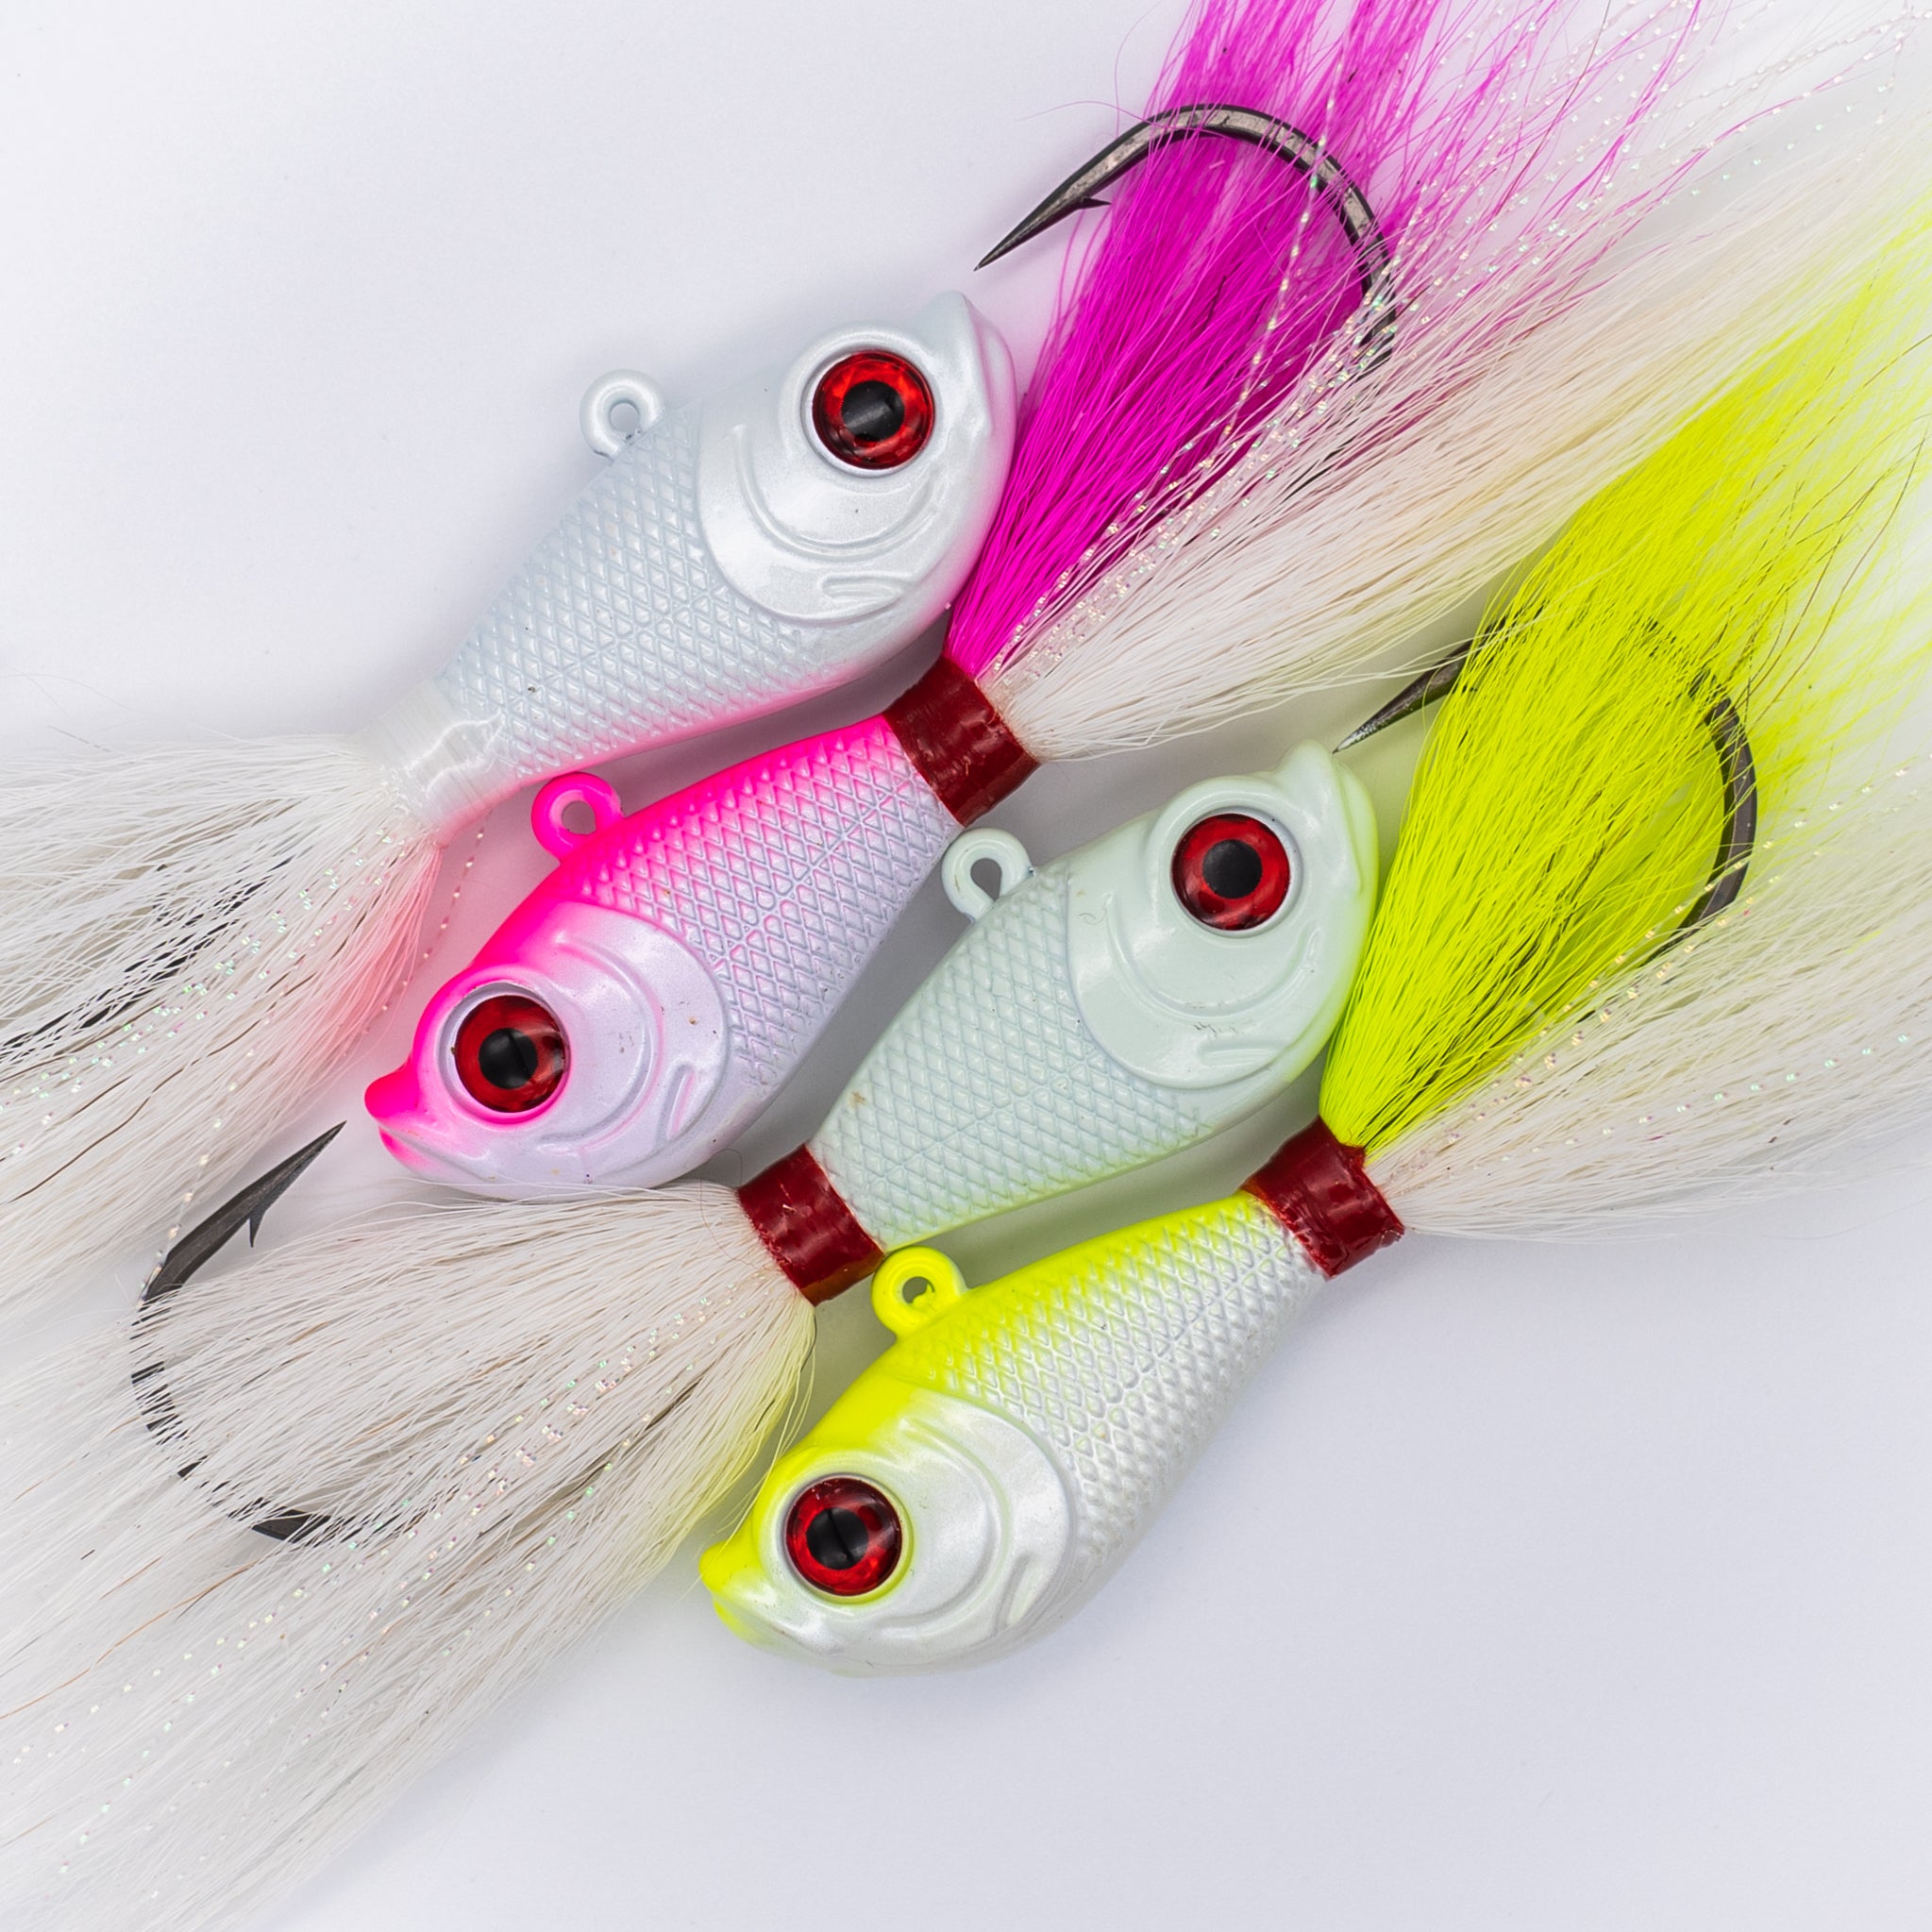 NPS Fishing - Haggerty Lures Weedless Bucktail Deceiver Jig